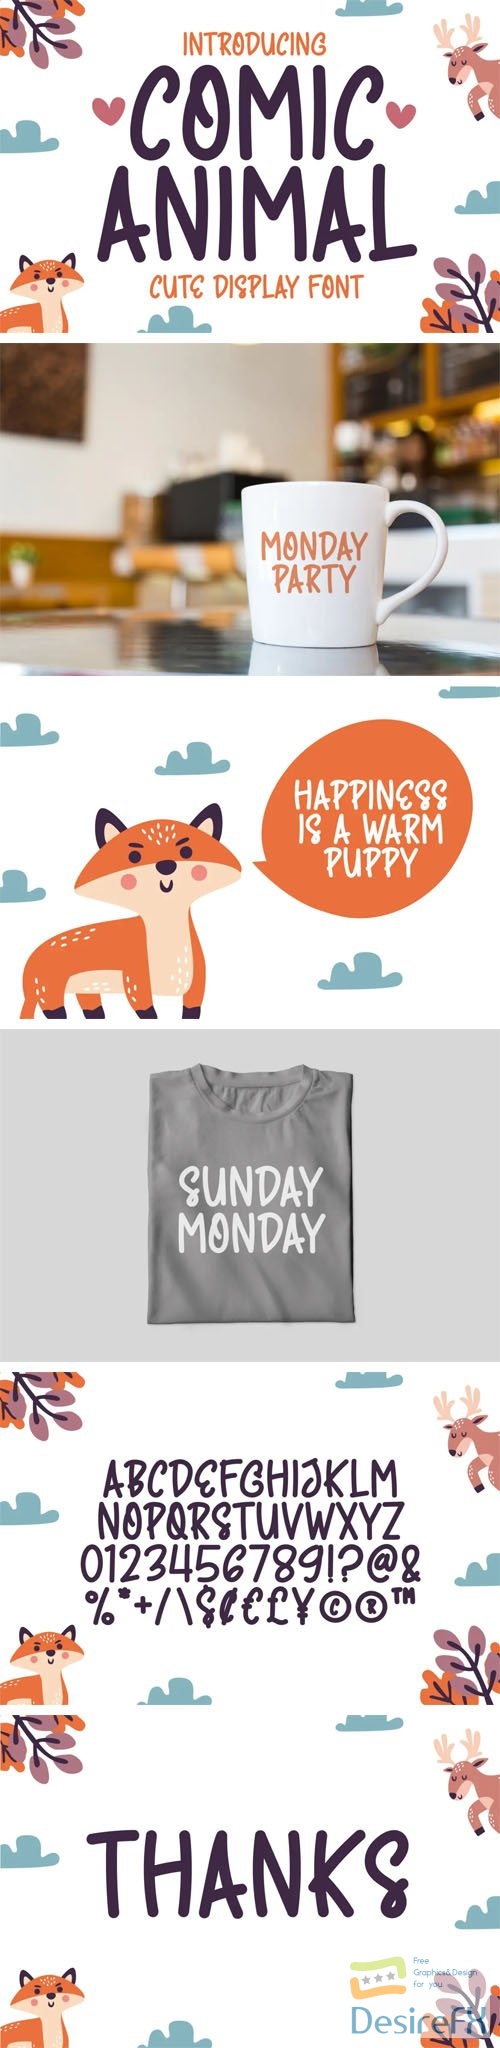 Comic Animal - Quirky &amp; Cute Display Font